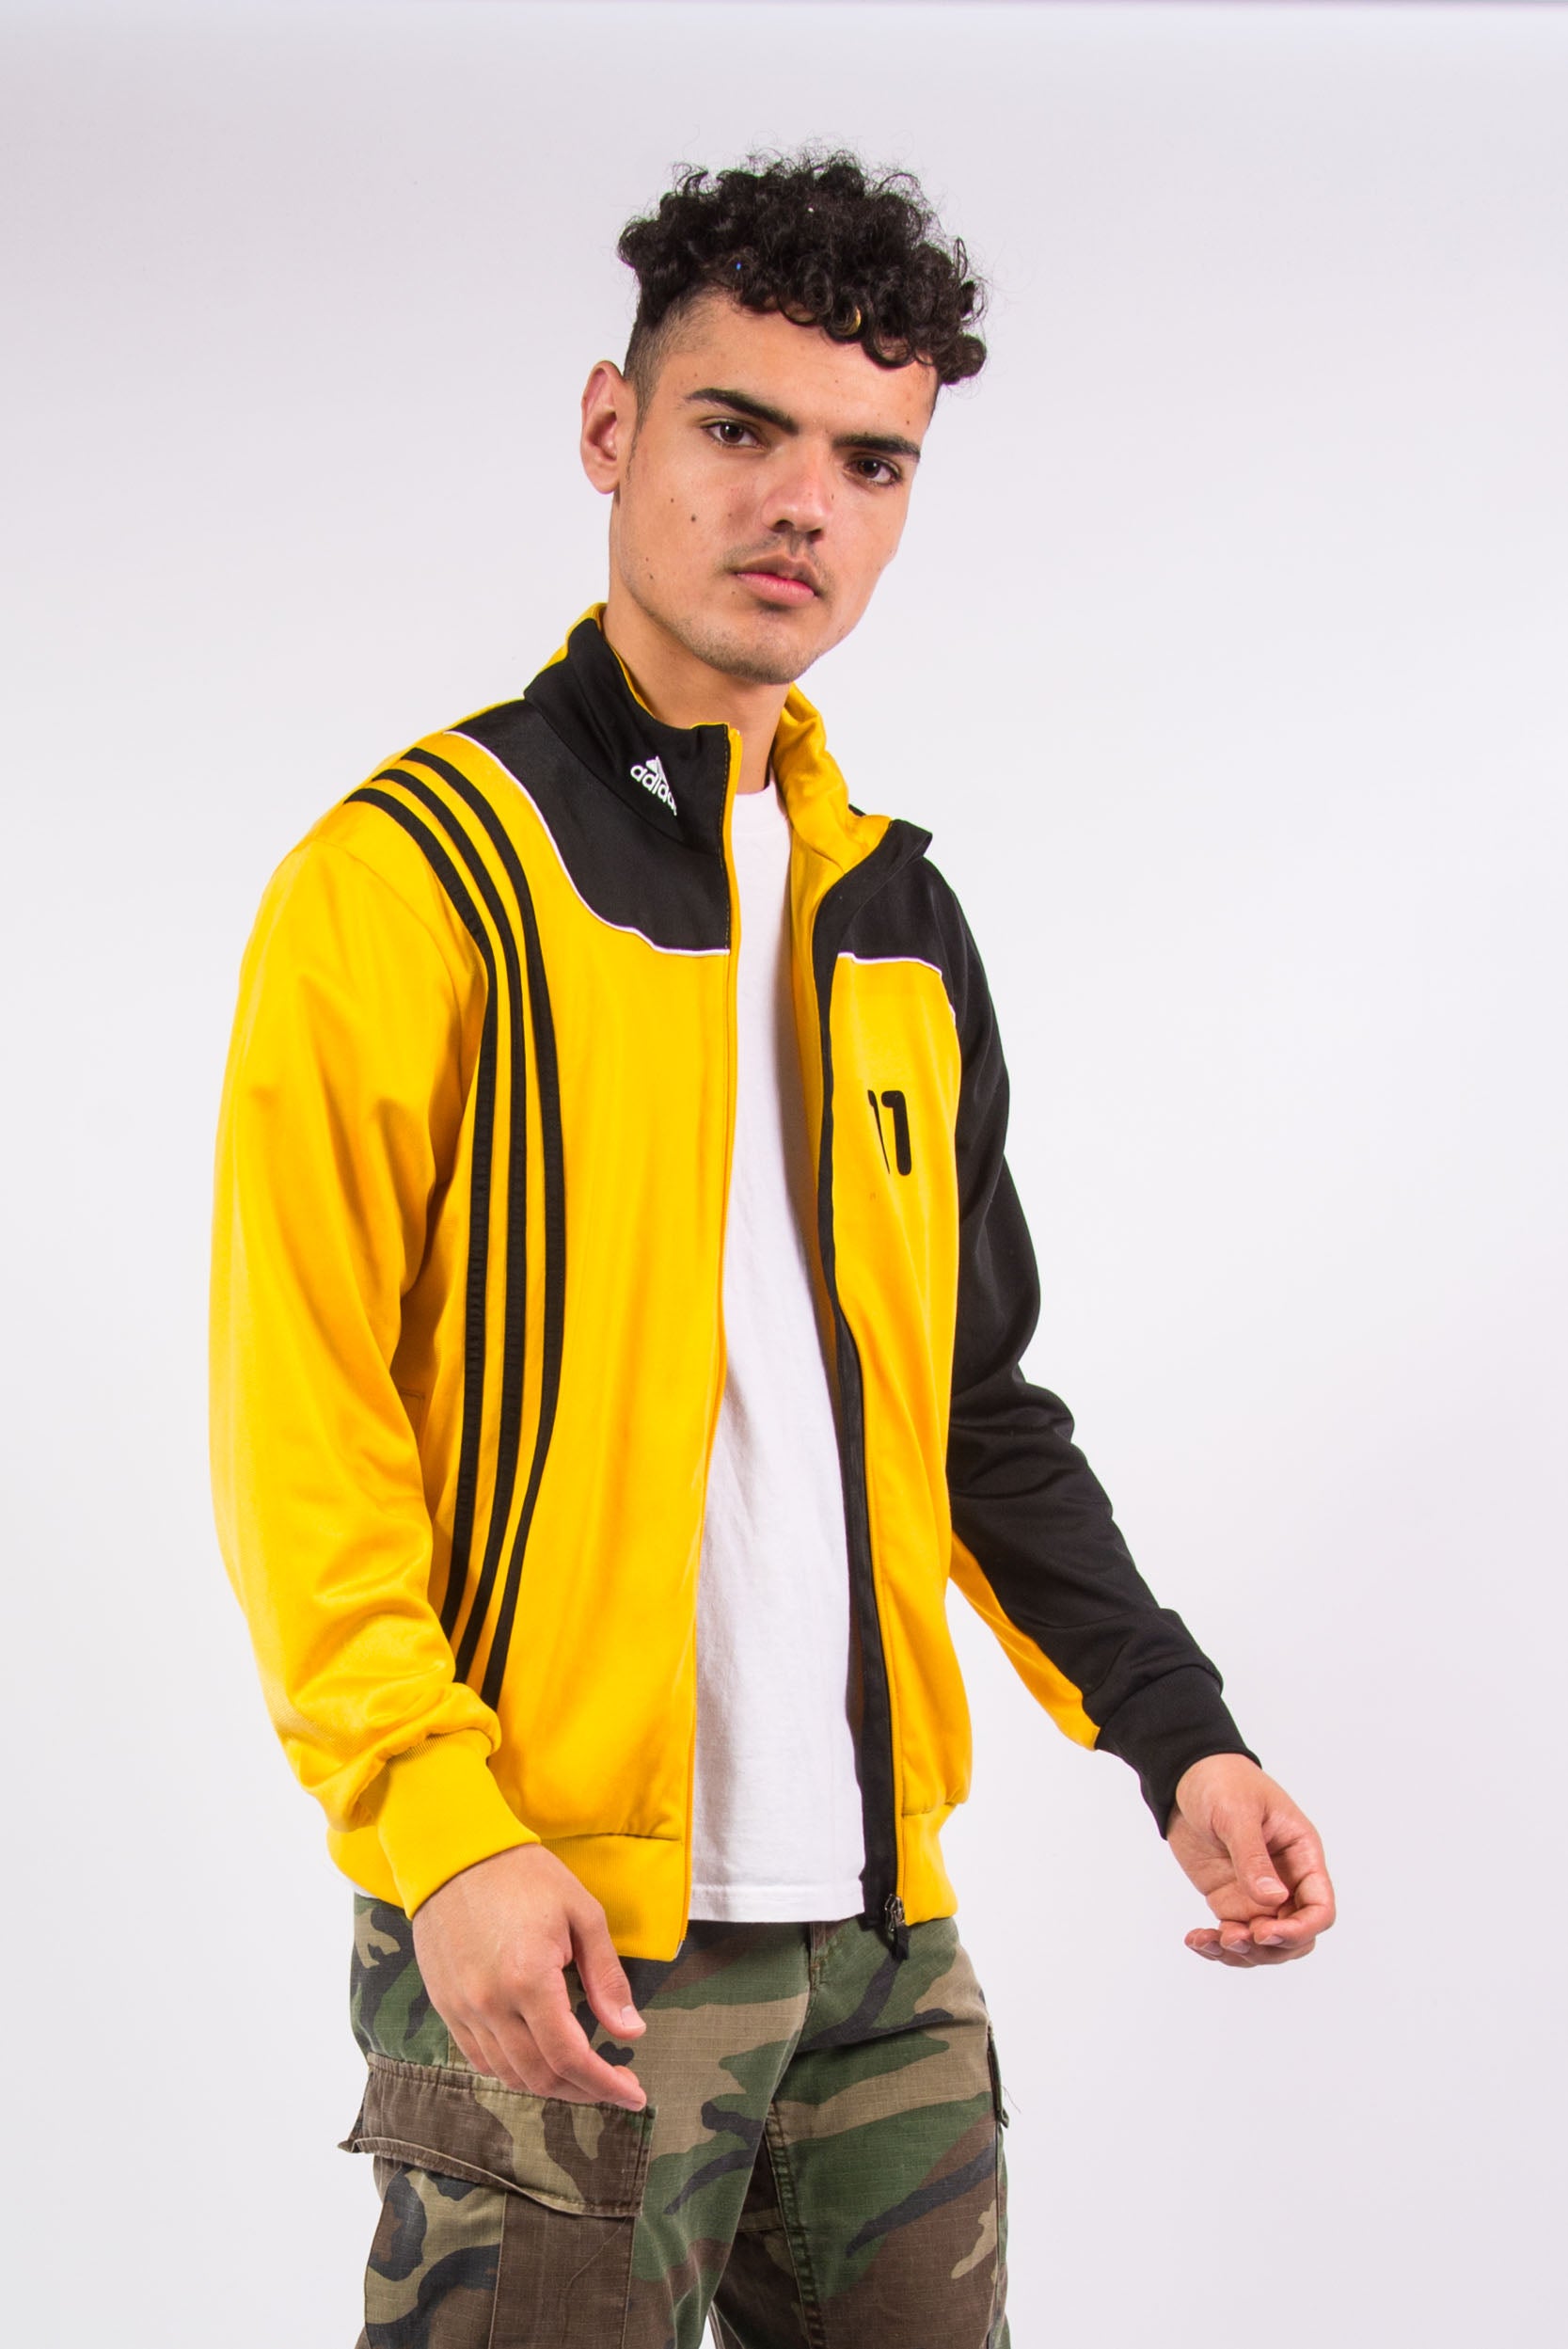 Adidas Y2K Tracksuit Top Jacket Yellow And Black – The Vintage Scene